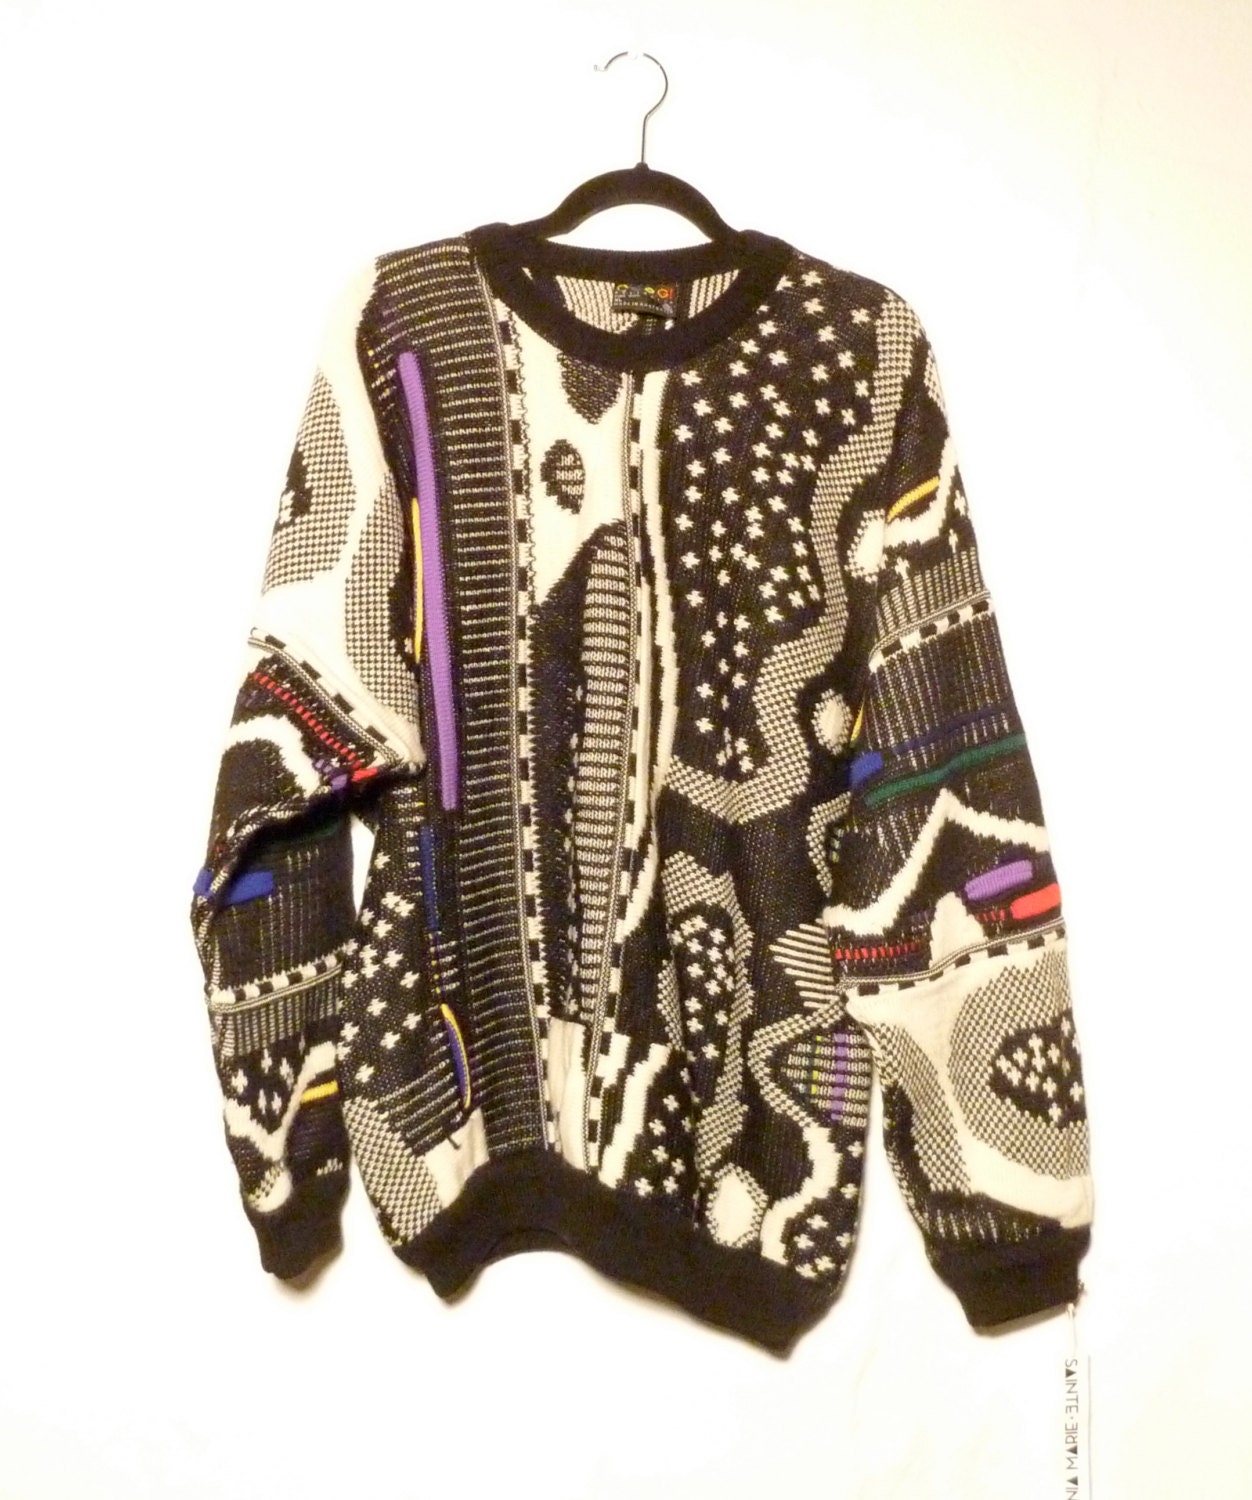 Coogi Sweater / Cosby Sweater by SainteMarieVintage on Etsy